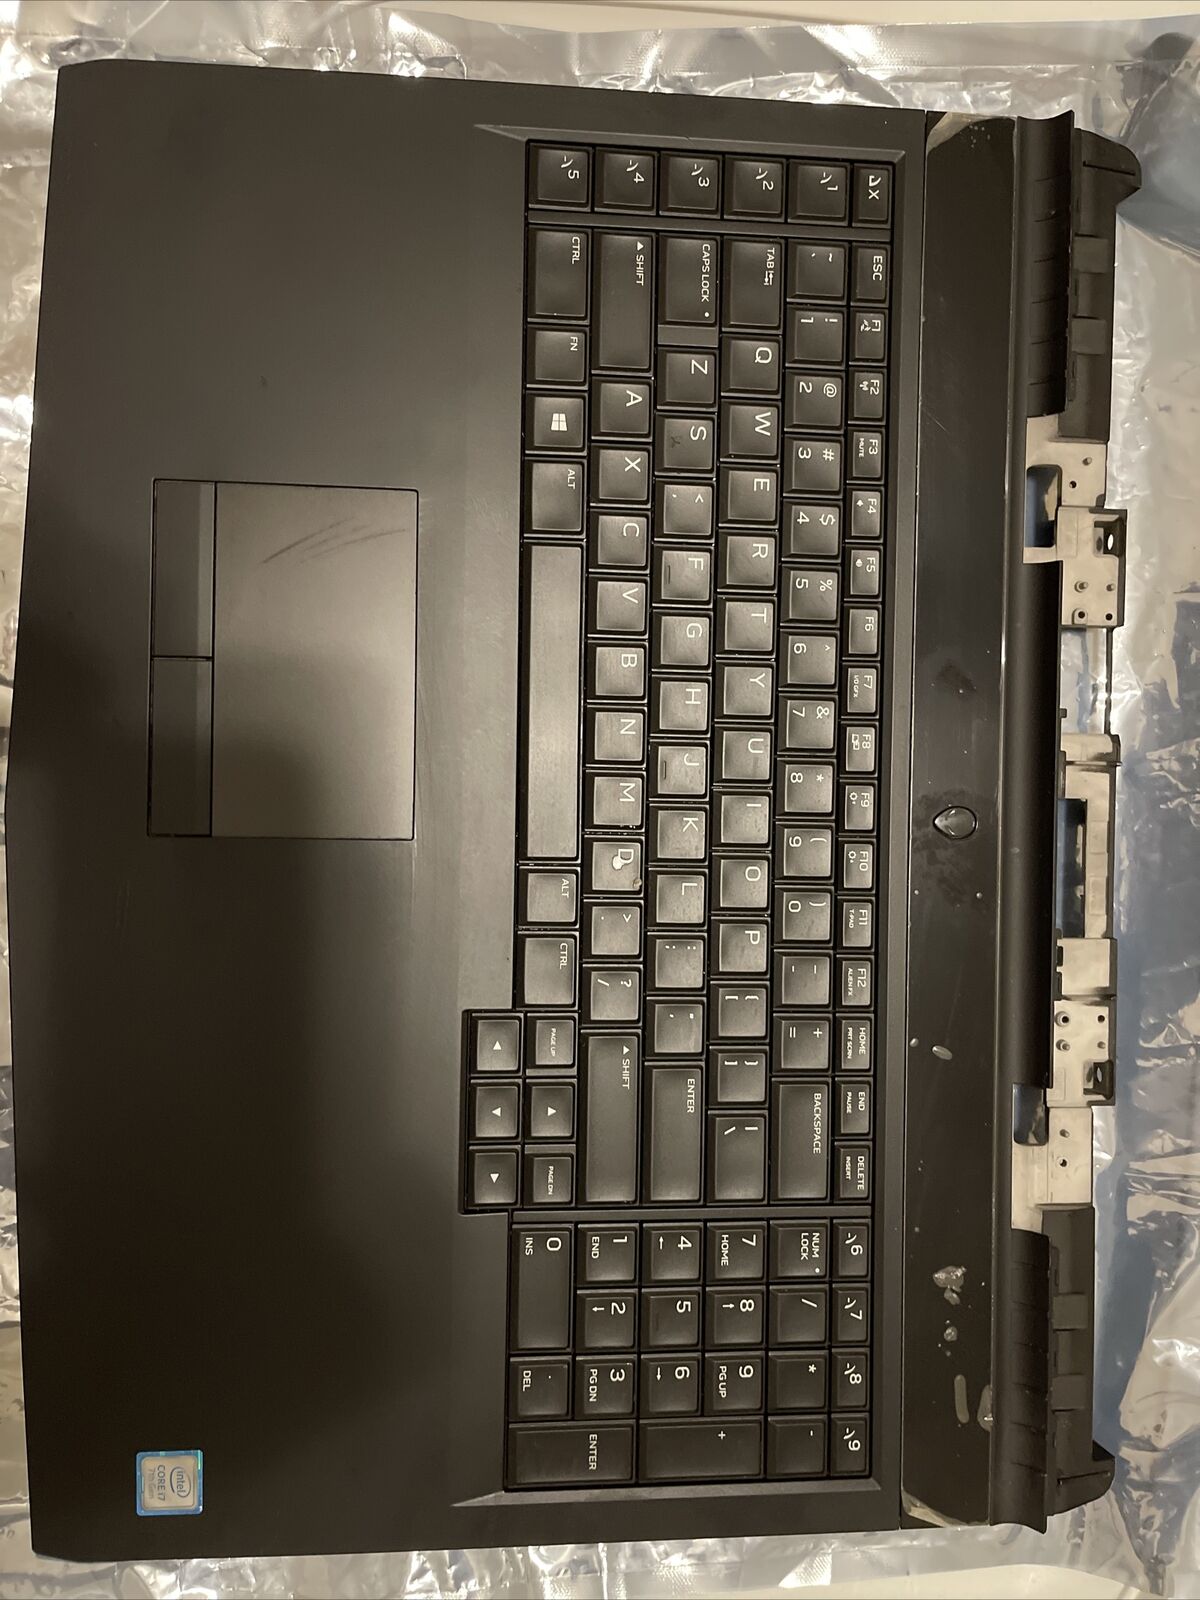 DELL ALIENWARE 17 R4 R5 SERIES KEYBOARD PALMREST TOUCHPAD ASSEMBLY K3Y92 H1 P1